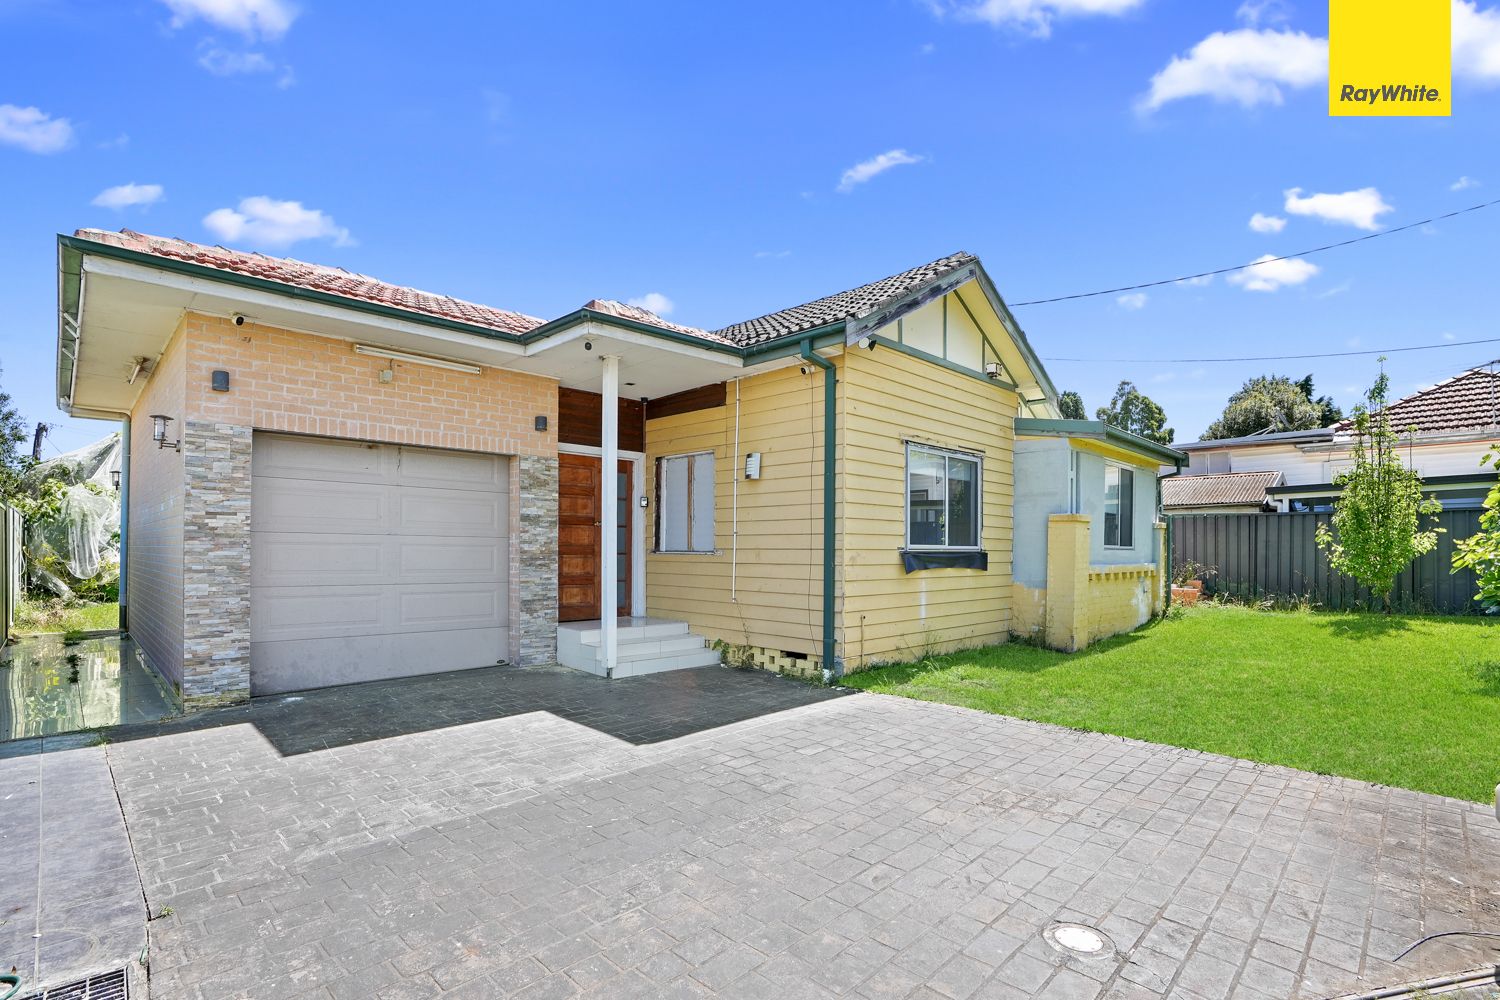 3 bedrooms House in 6 Parkes Street GUILDFORD NSW, 2161